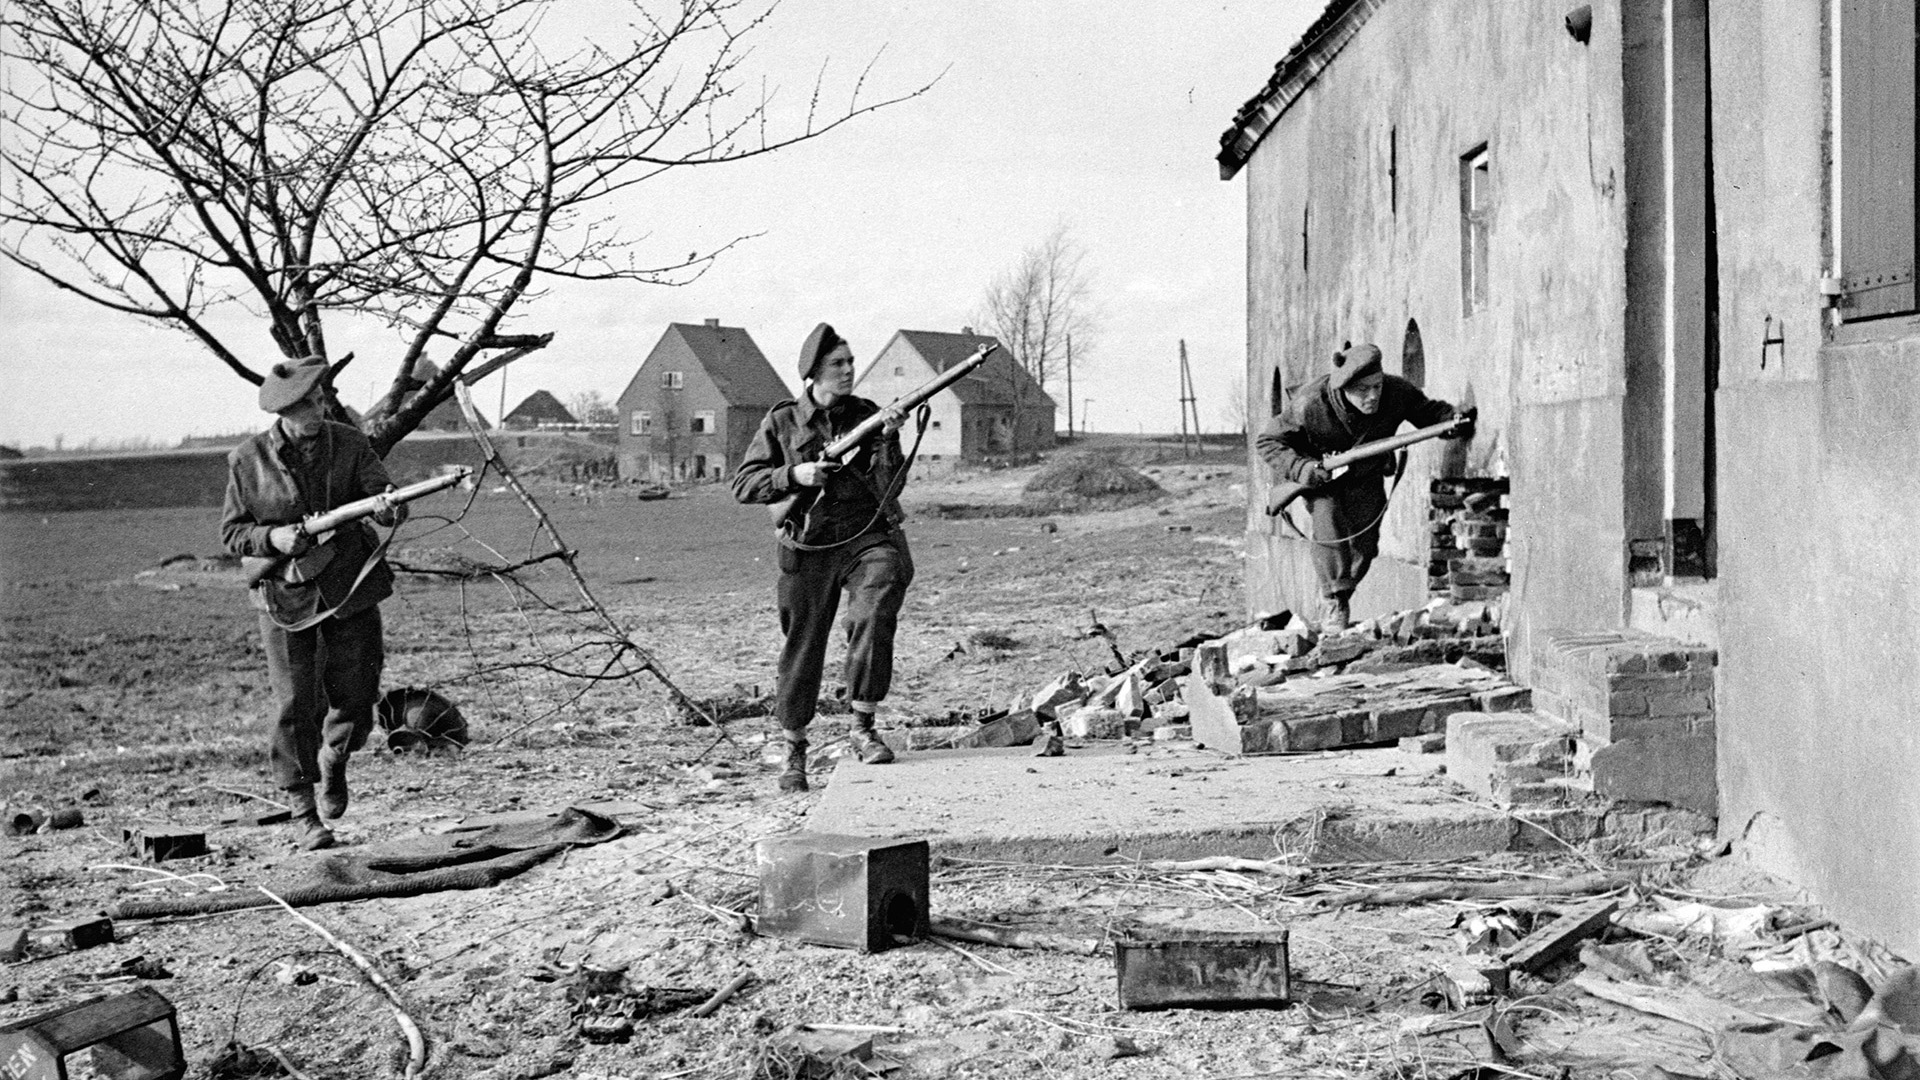 Canadian soldiers clear a group of buildings on the outskirts of a town in France. Canadian troops were involved in heavy fighting with Field Marshal Bernard L. Montgomery’s 21st Army Group during the Normandy campaign and beyond.